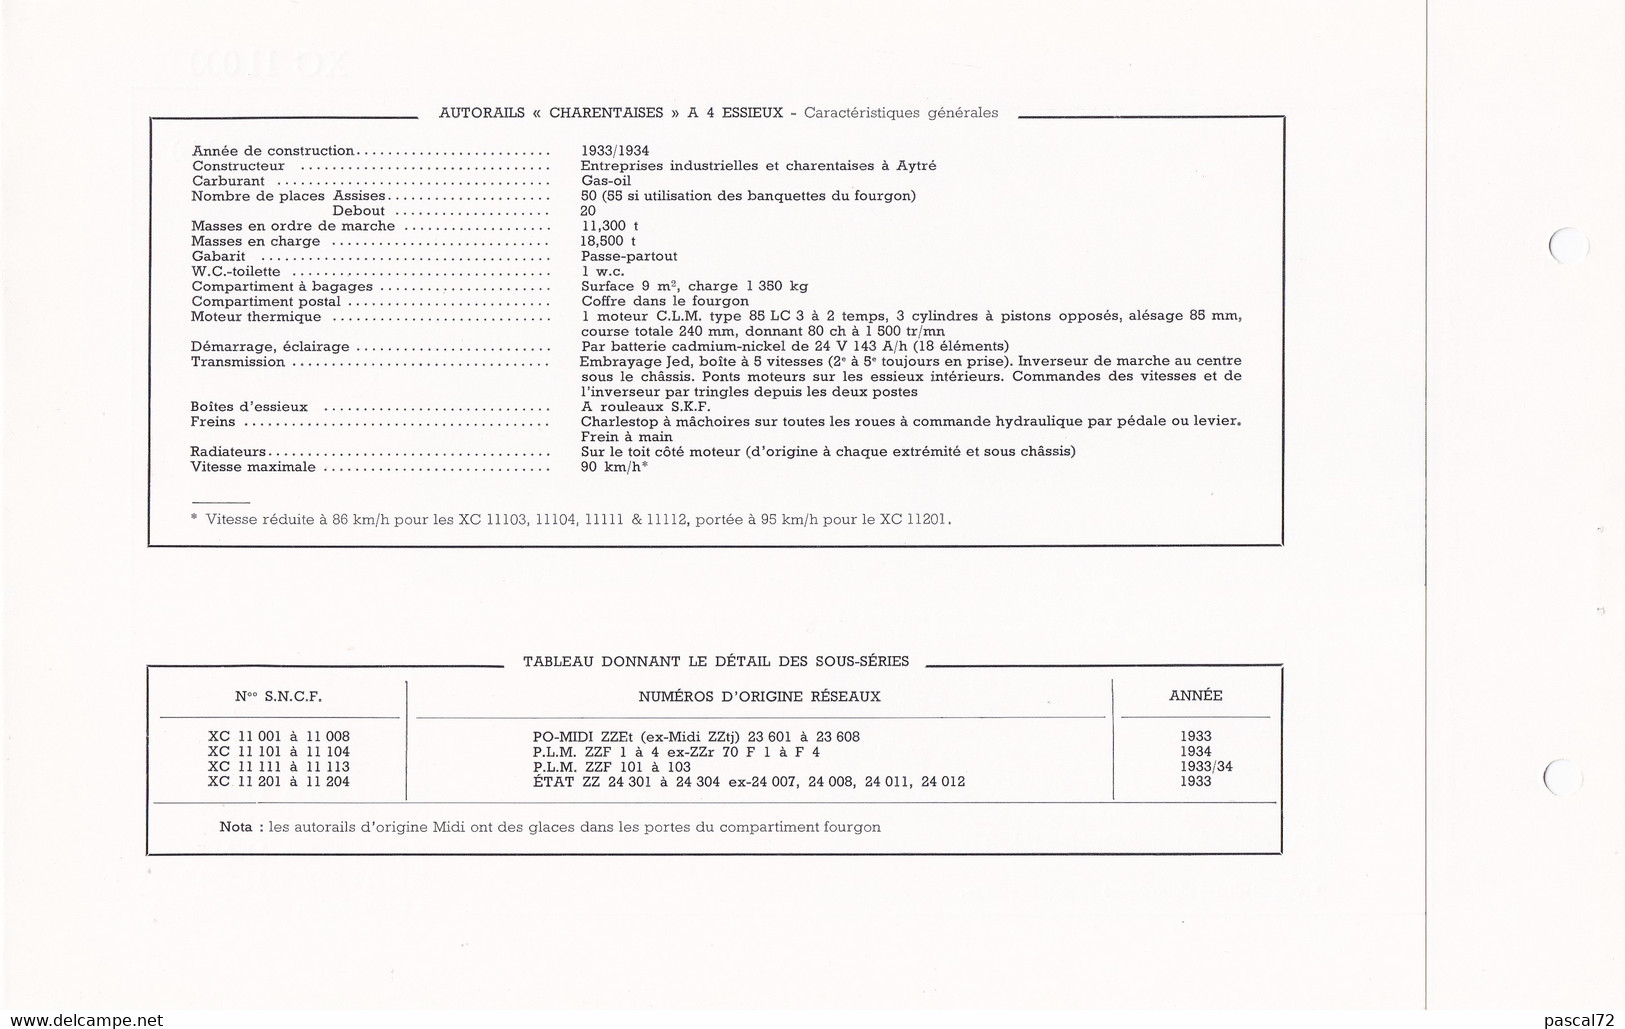 XC 11000 FICHE DOCUMENTAIRE DOUBLE LOCO REVUE N° 389/390 AVRIL 1972 - French